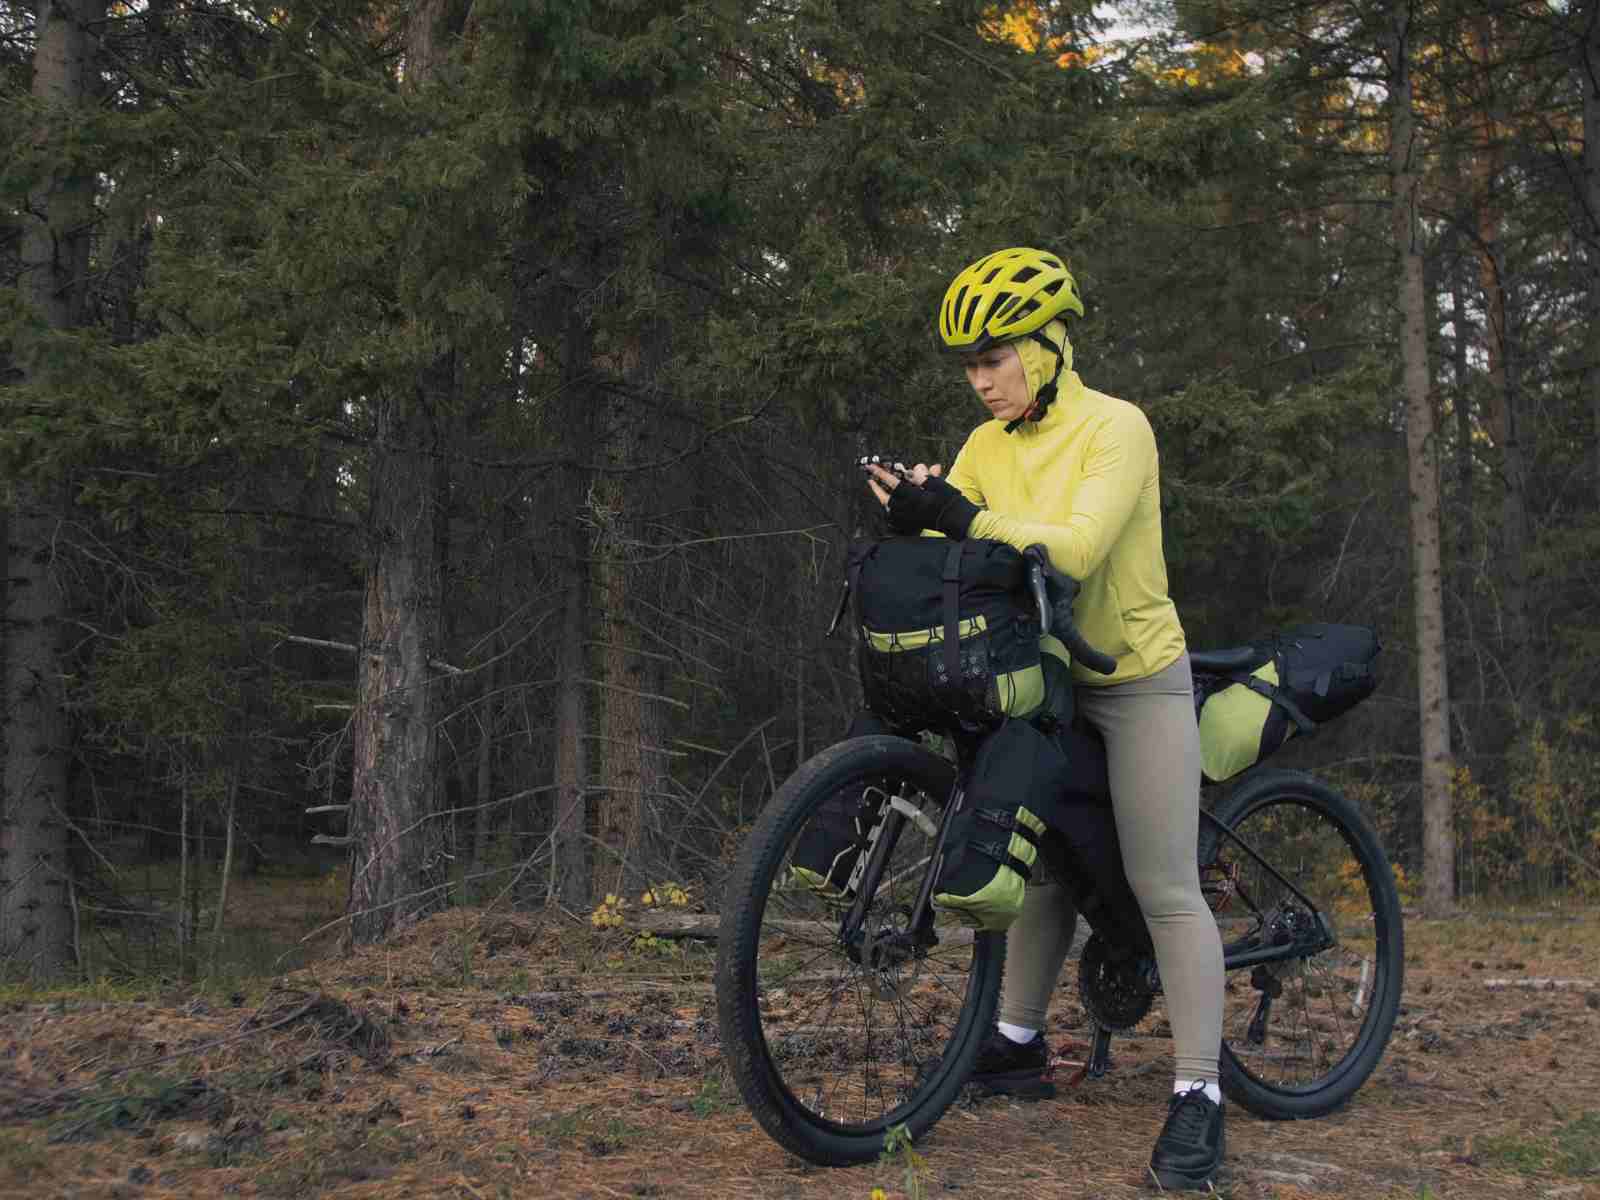 bikepacking luggage tends to be compact with rugged velcroe straps